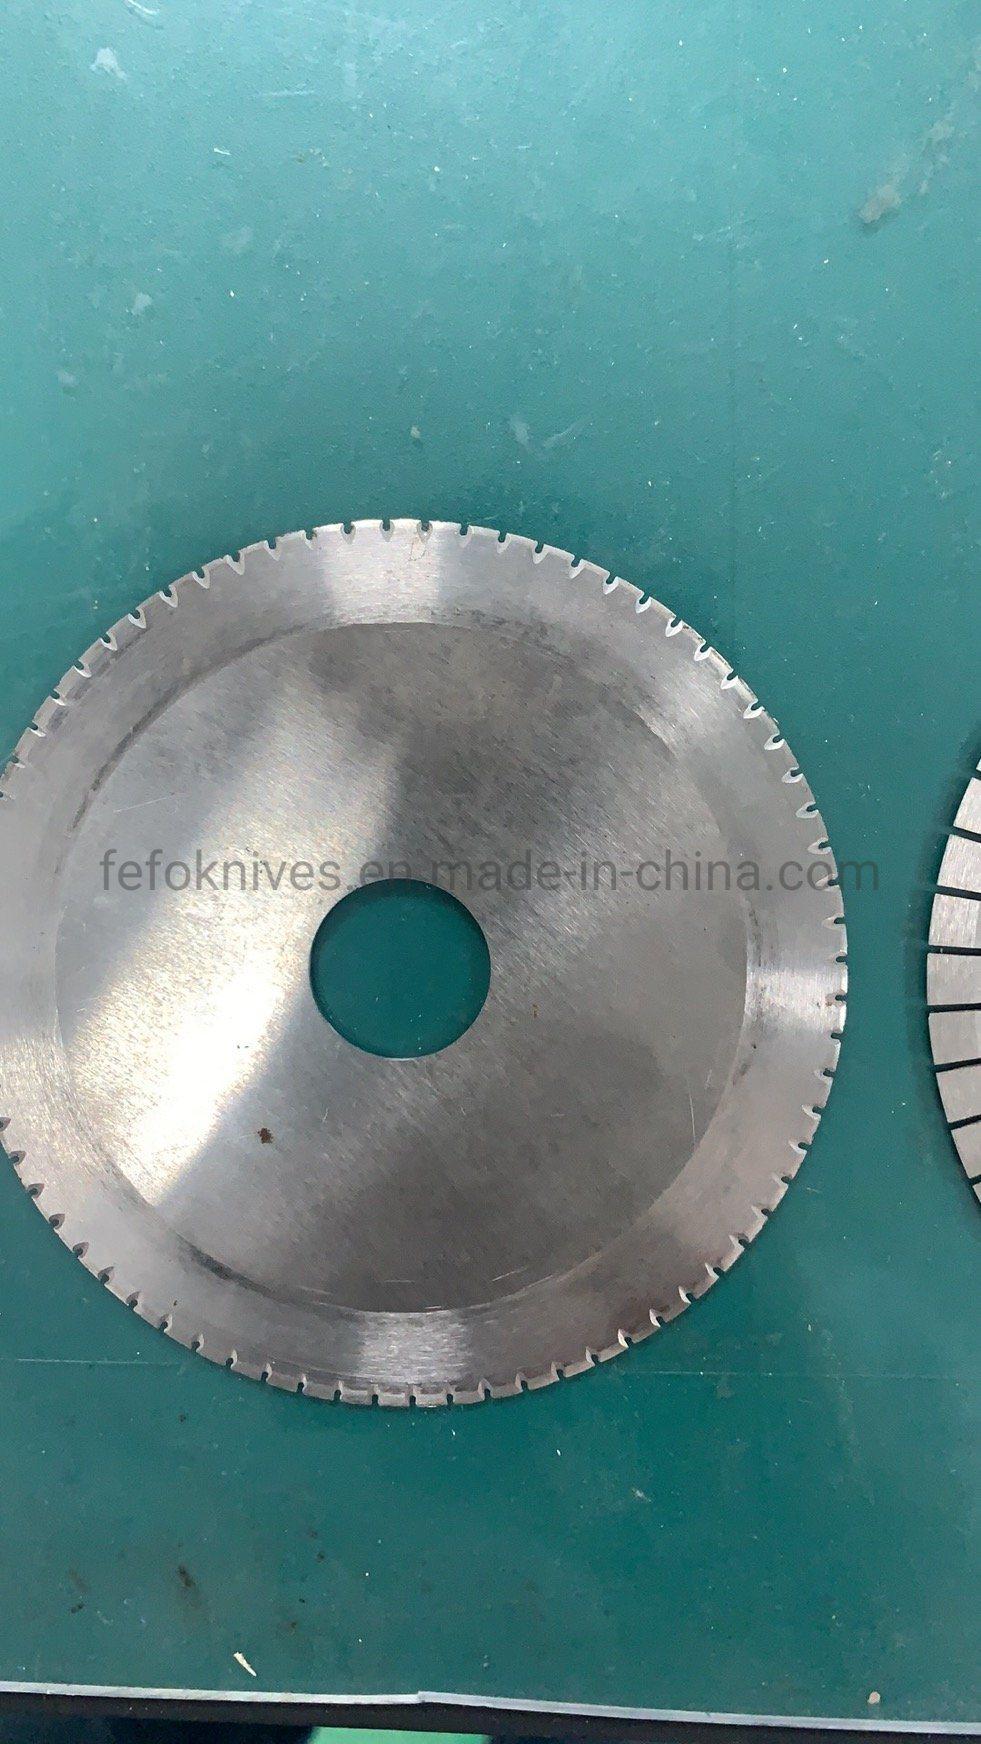 China Manufactured Machine Knives for All Types of Cutting Machines